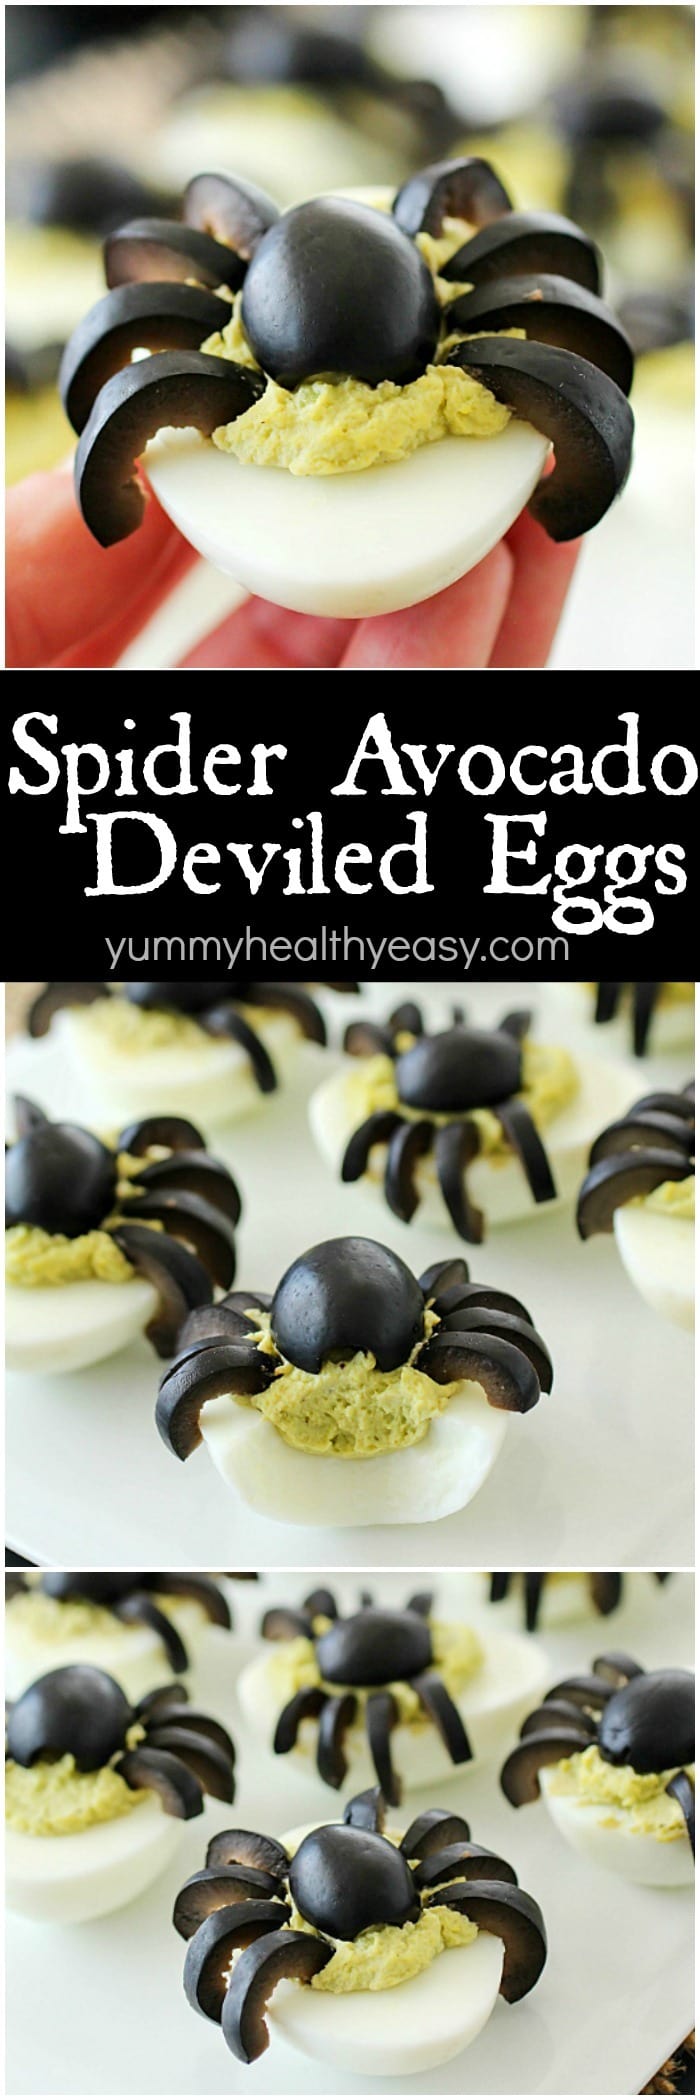 Celebrate Halloween with Spooky Spider Avocado Deviled Eggs! Your party guests will love these creepy crawly olive spiders on top of ghoulishly green avocado deviled eggs! AD